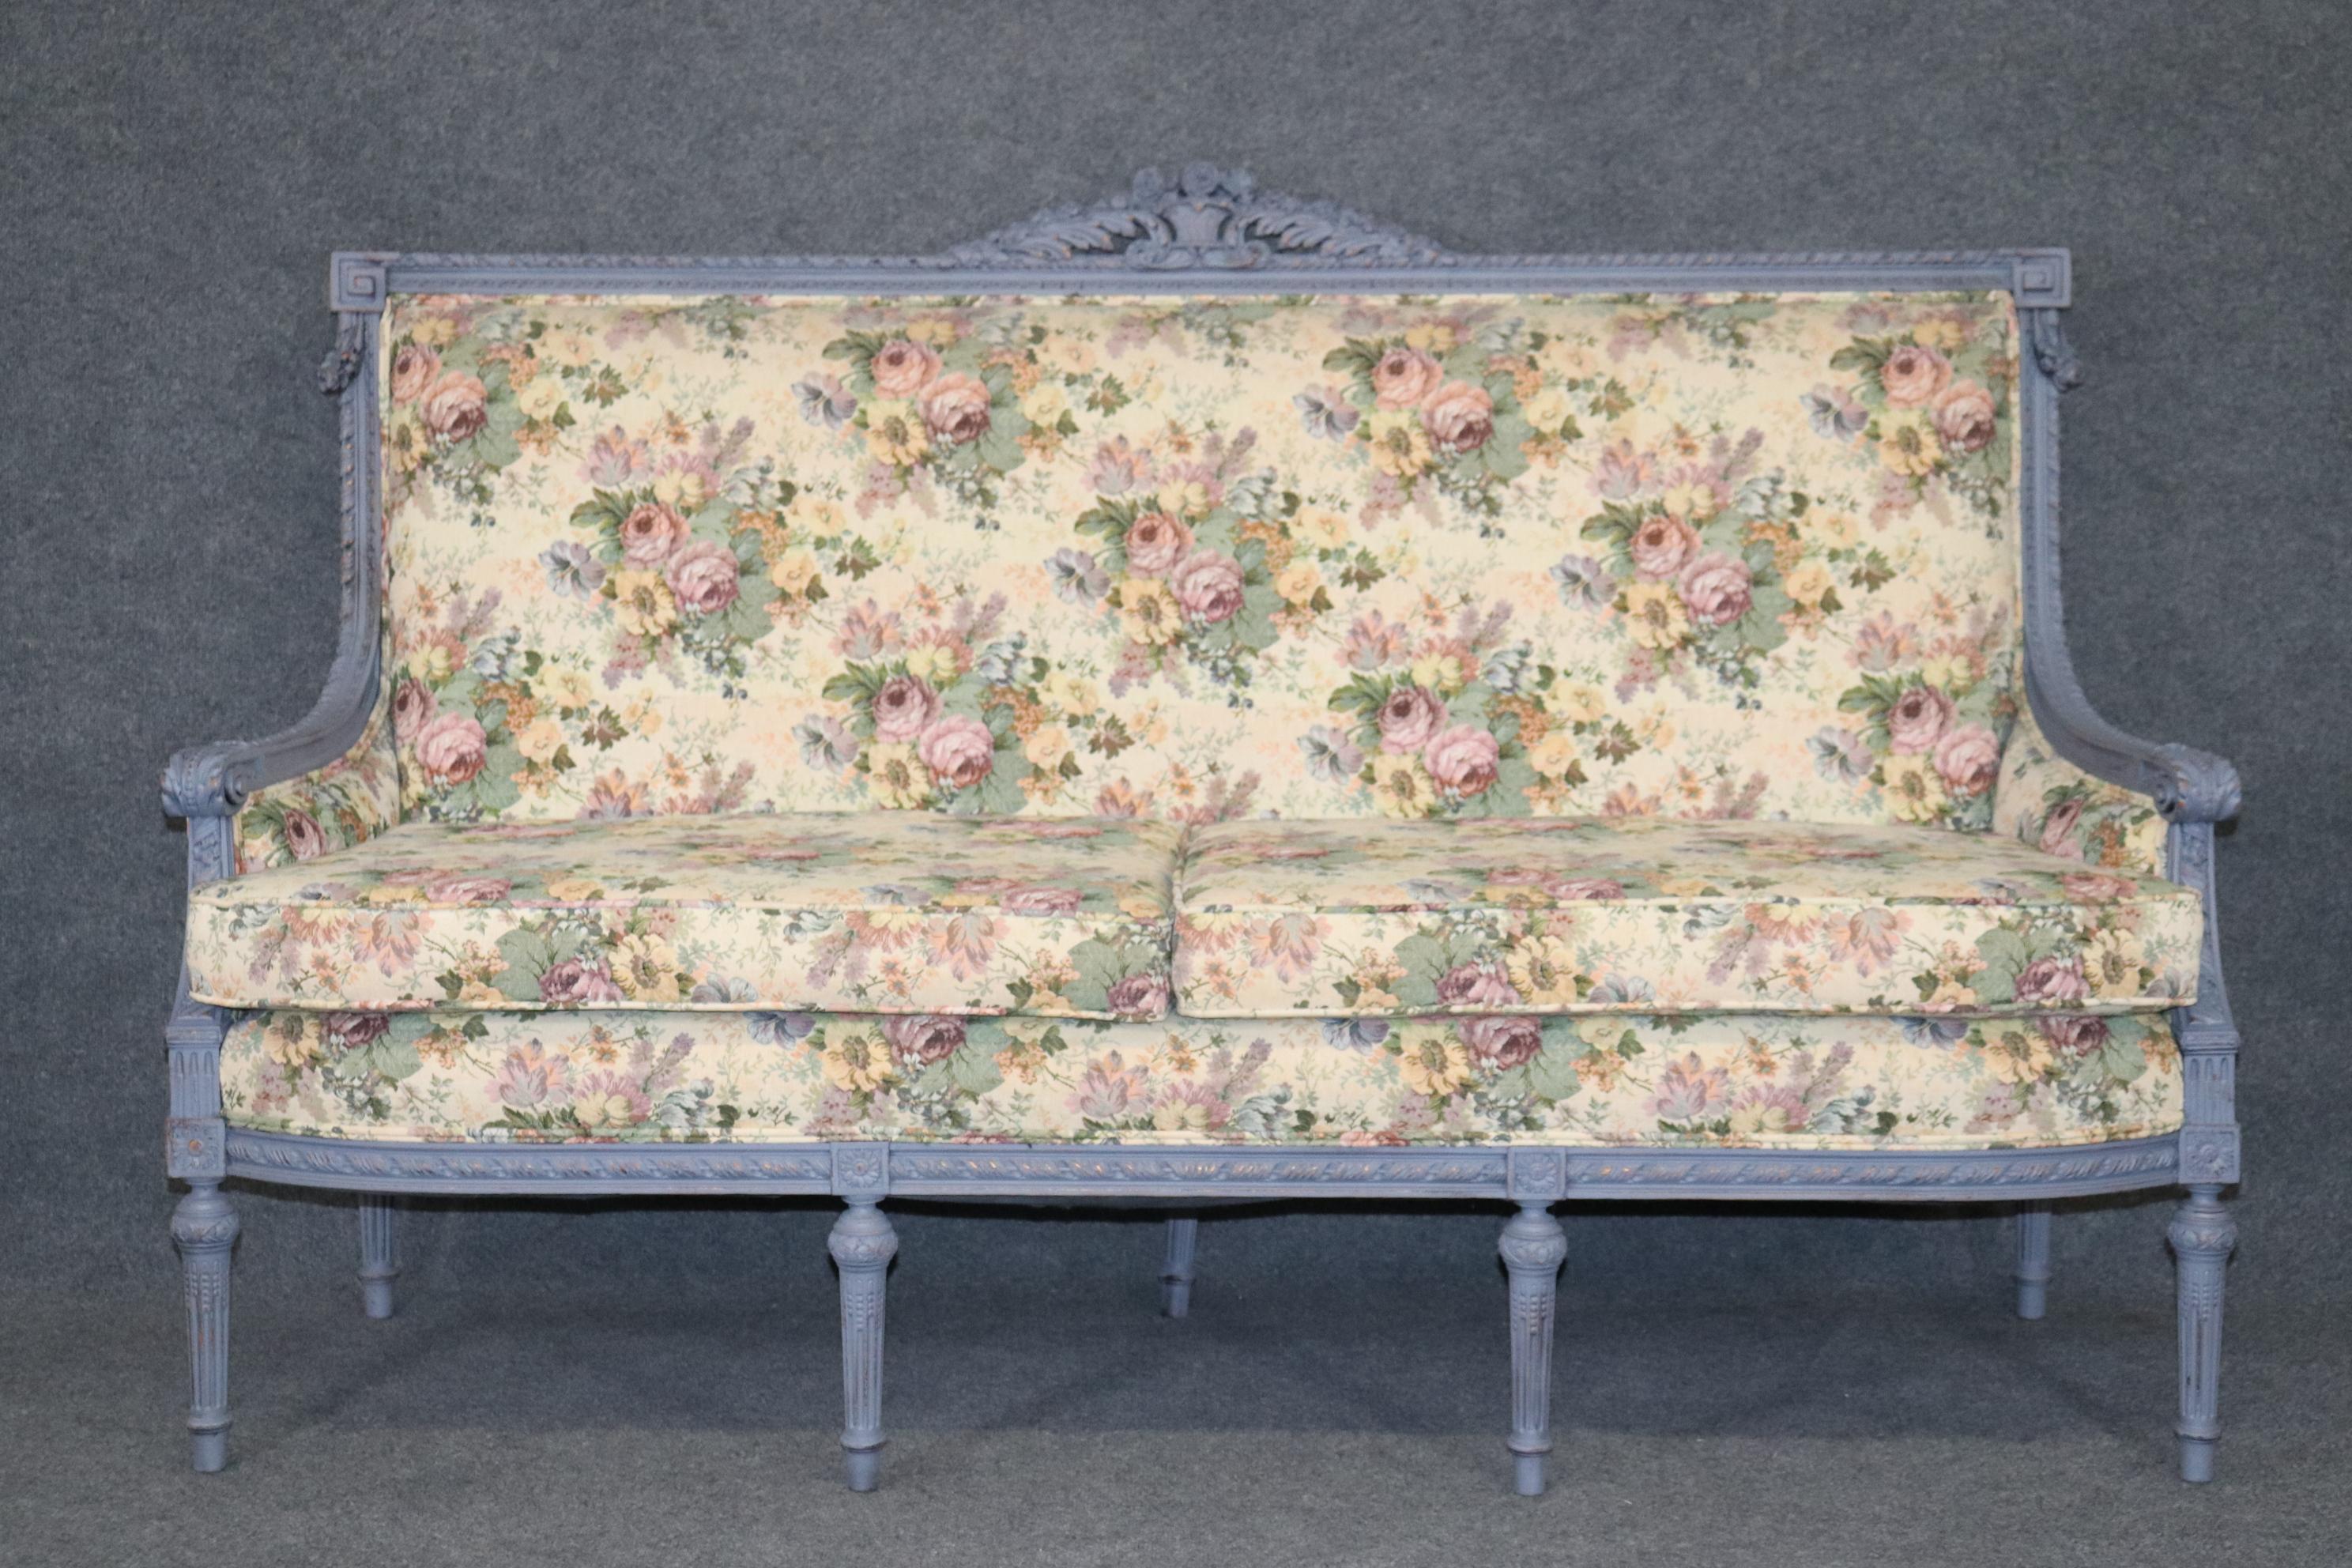 Dimensions- H: 47in W: 74 1/4in D: 30 1/2in SH: 21 1/2in
This is an amazing piece of Louis XIV style furniture the distressed finish looks really cool and and brings character to the piece. This settee is perfect for any living space and will bring